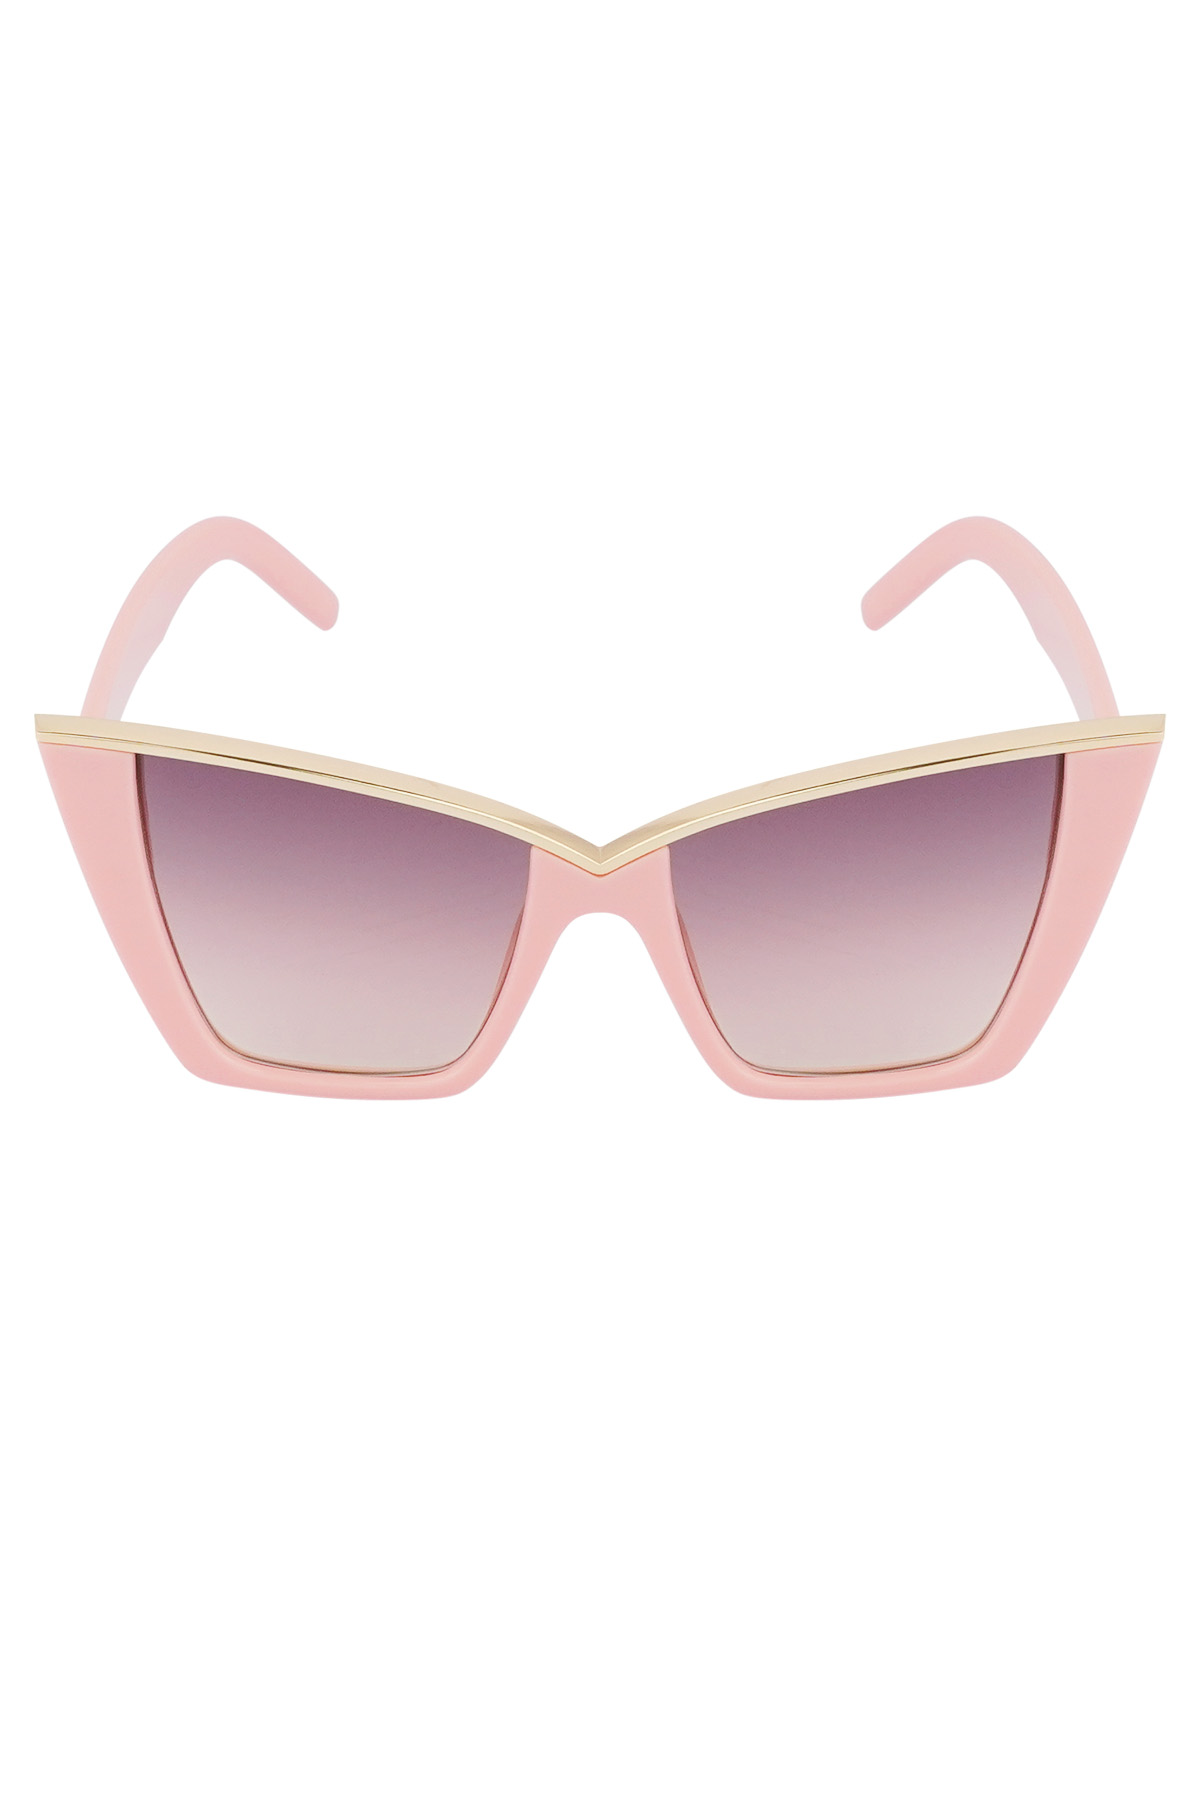 Chic sunglasses - pink  Picture4